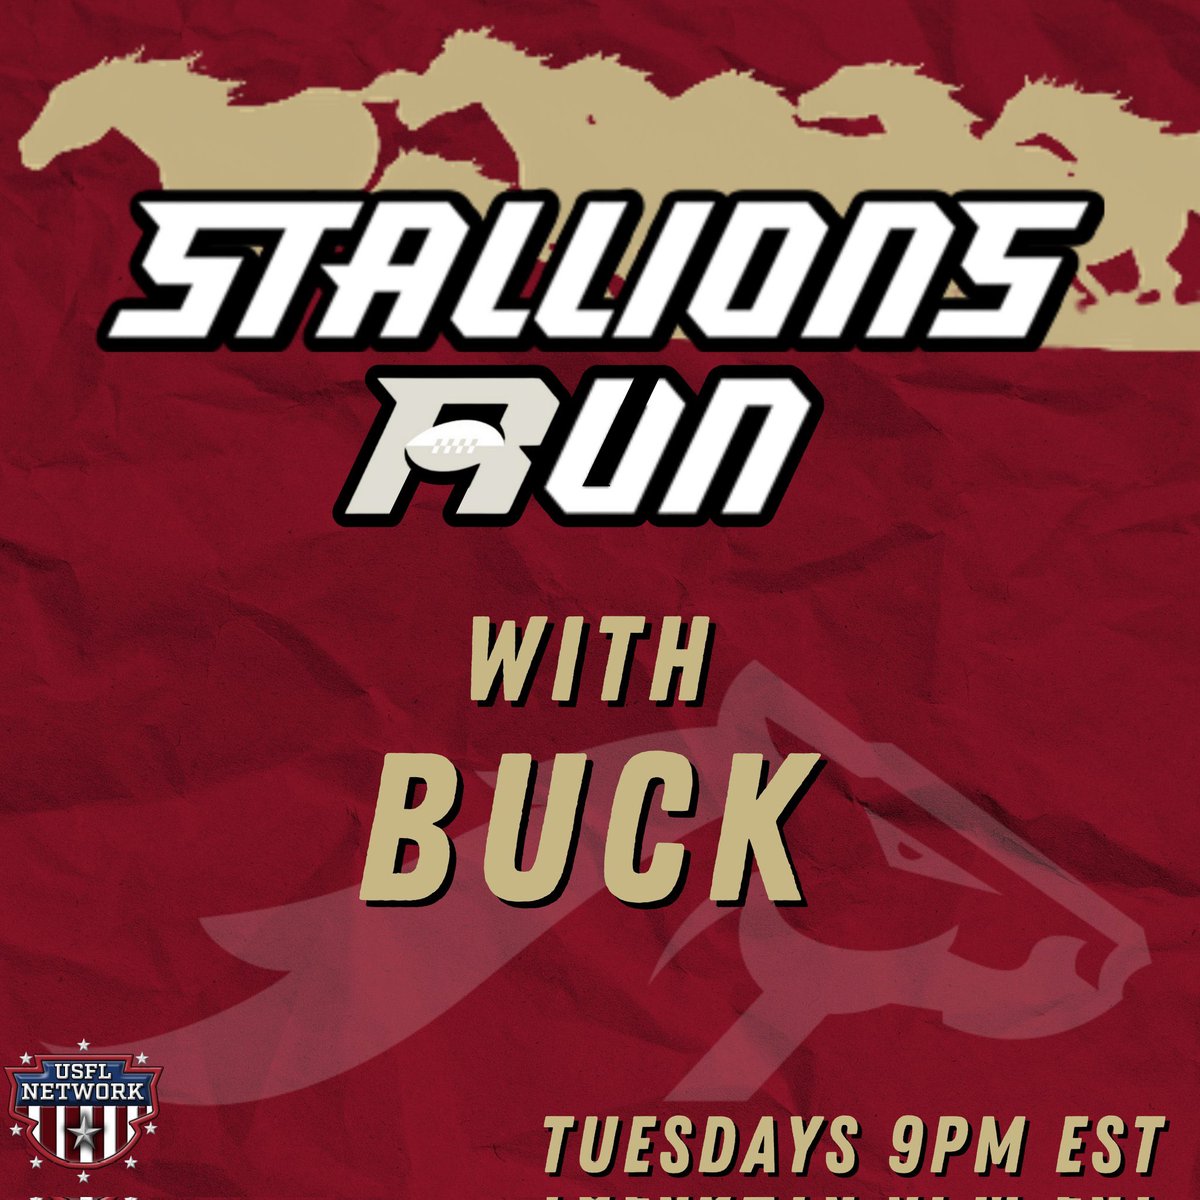 A new Stallions Run is tonight at 9 PM EST! Joined by @Teamgrayy for this episode! Be sure to tune in.